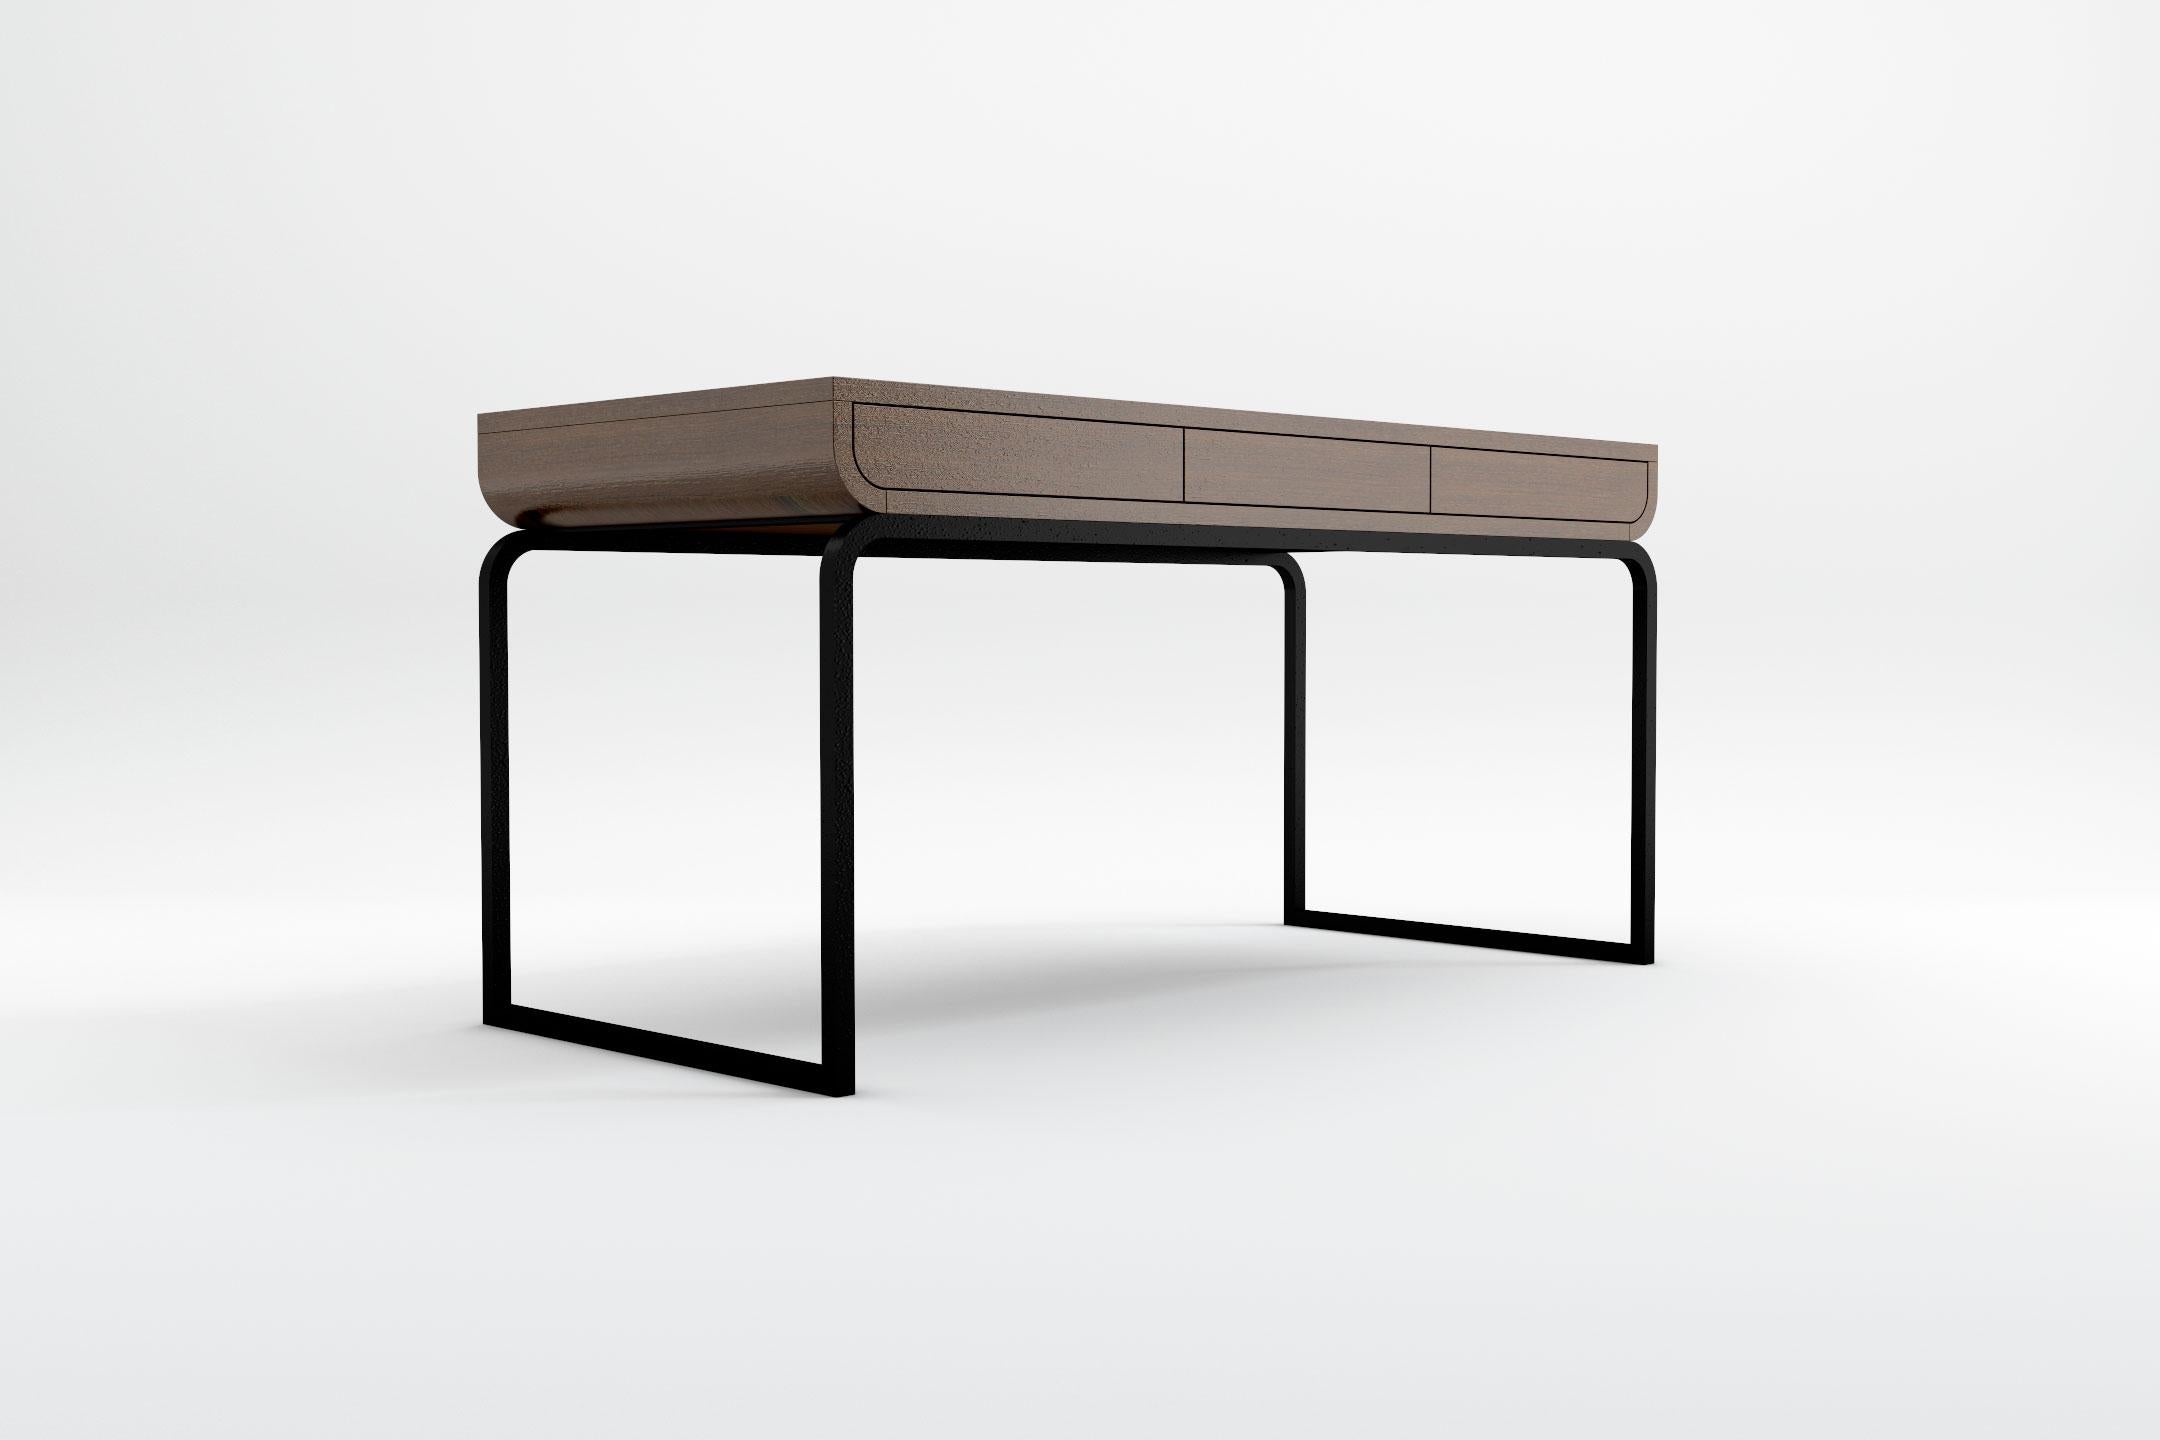 Intertwining wood and wrought iron, the sculptural lines of the Raw collection combine exquisite natural materials with modern Scandinavian shapes to create a breathtaking and unique design. The desk comprises a set of three drawers with push-open